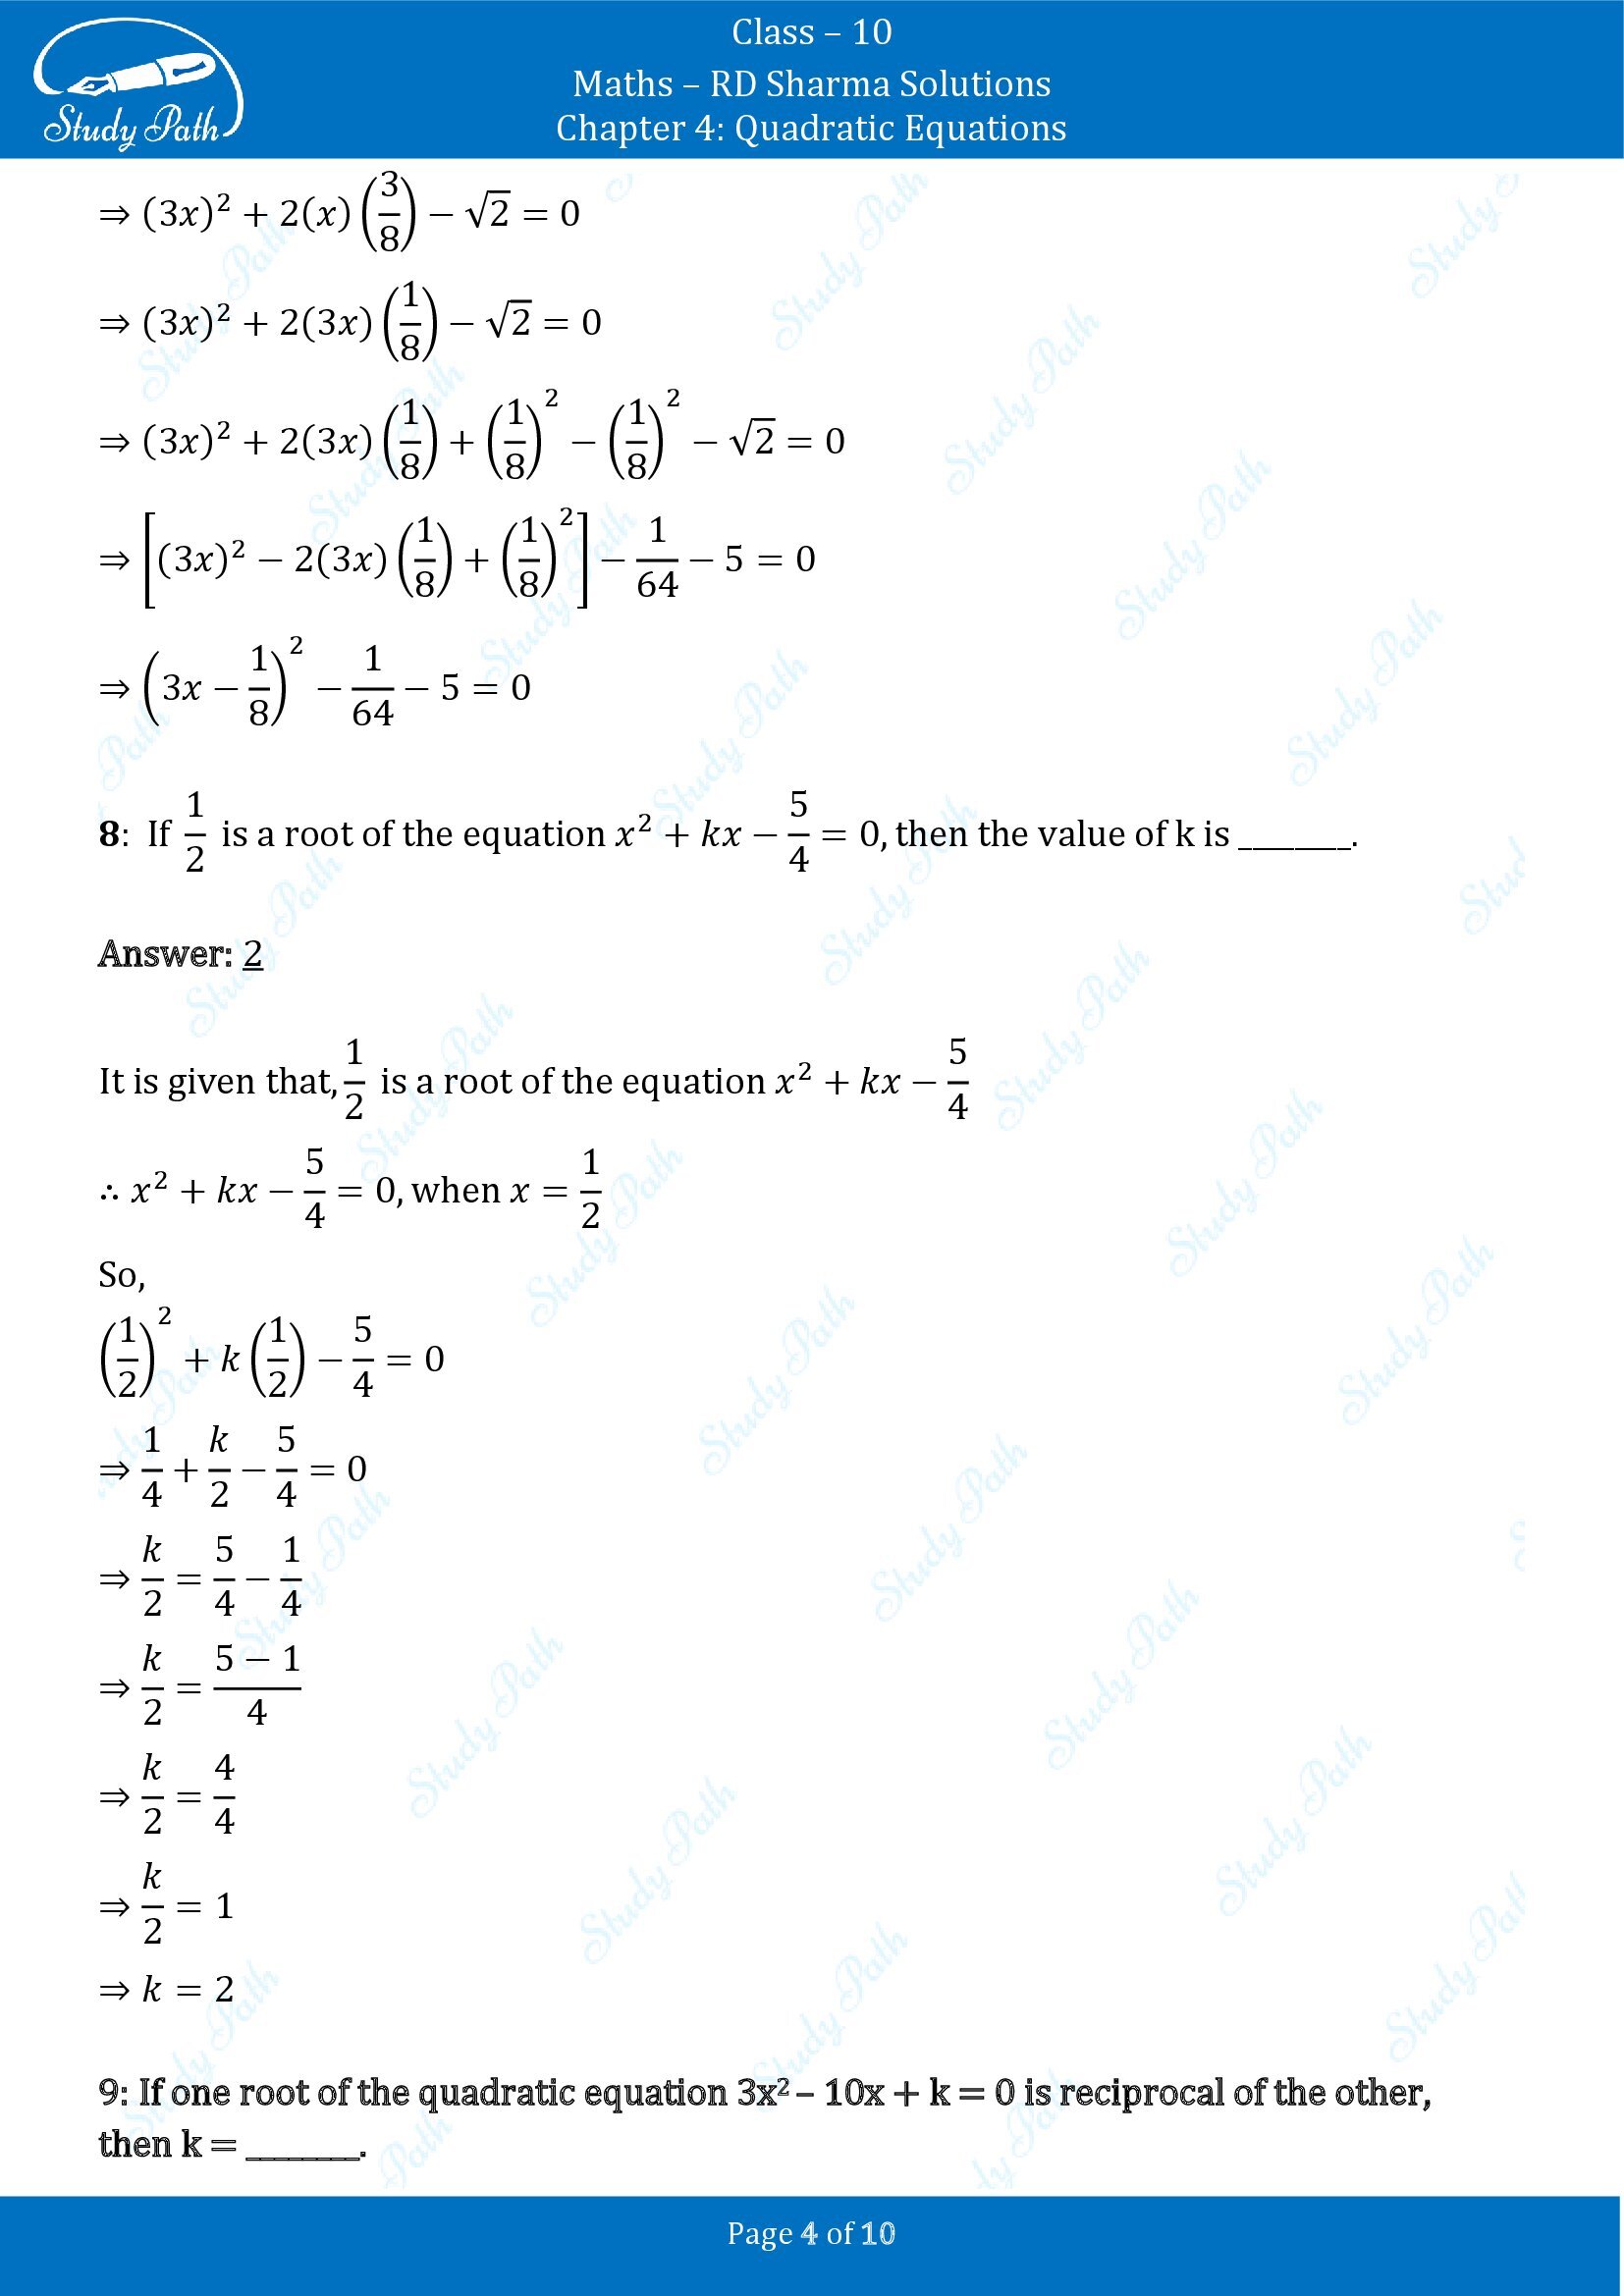 RD Sharma Solutions Class 10 Chapter 4 Quadratic Equations Fill in the Blank Type Questions FBQs 00004